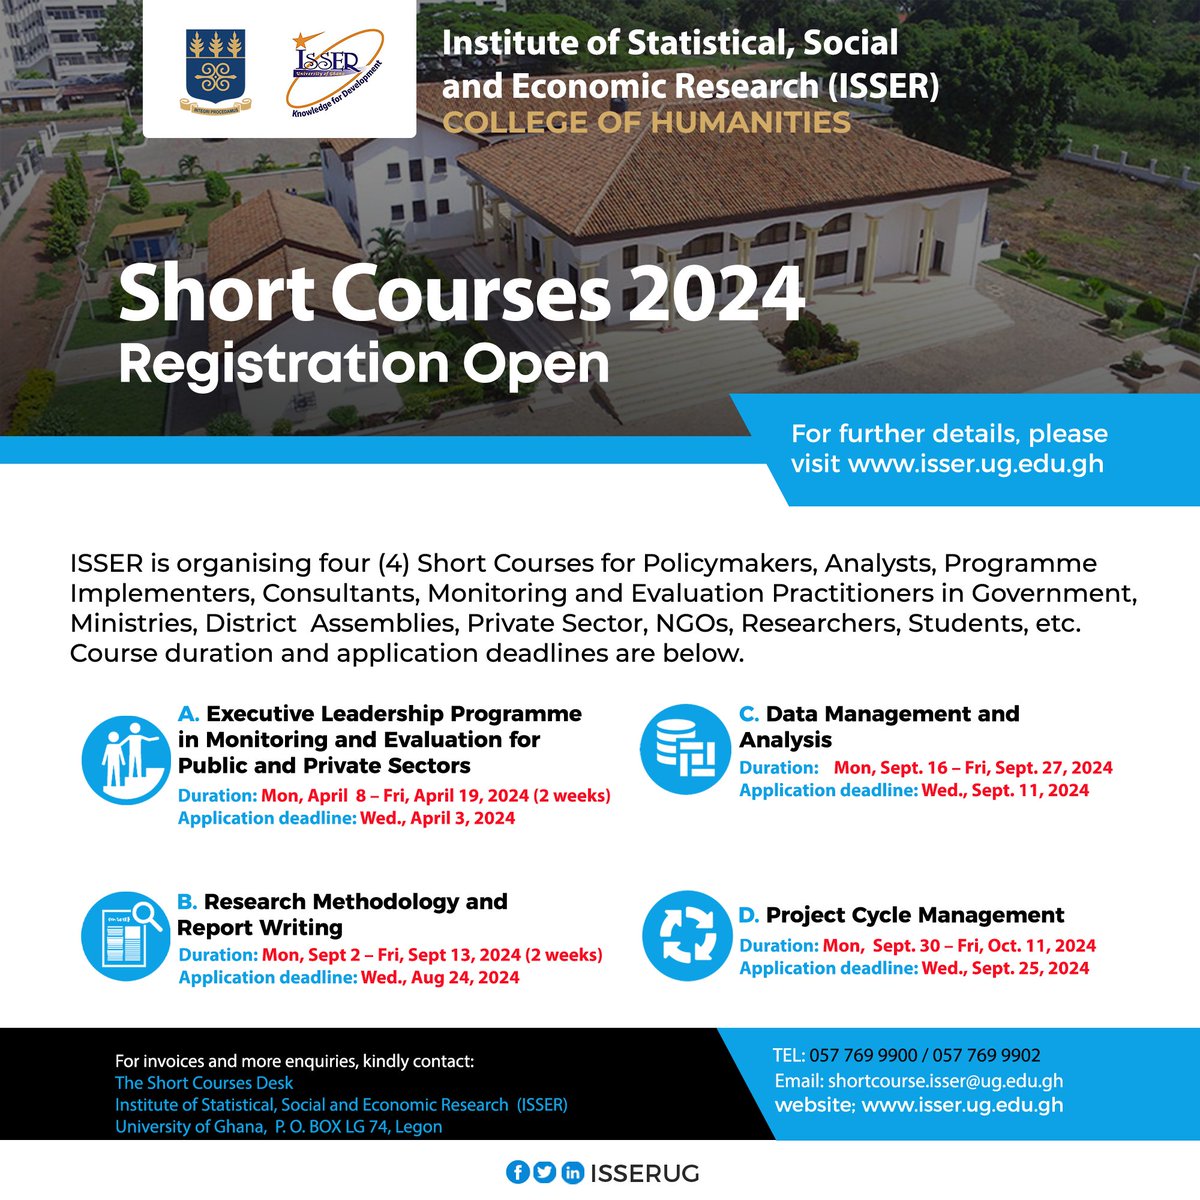 📢📢 Join us for the 2024 round of short courses. The Leadership Program in M&E starts next month. See poster for details & apply now for impactful change. ➡️➡️isser.ug.edu.gh/short-courses #professionaldevelopment #shortcourses2024 #KnowledgeForDevelopment @ameyawds @pquartey1